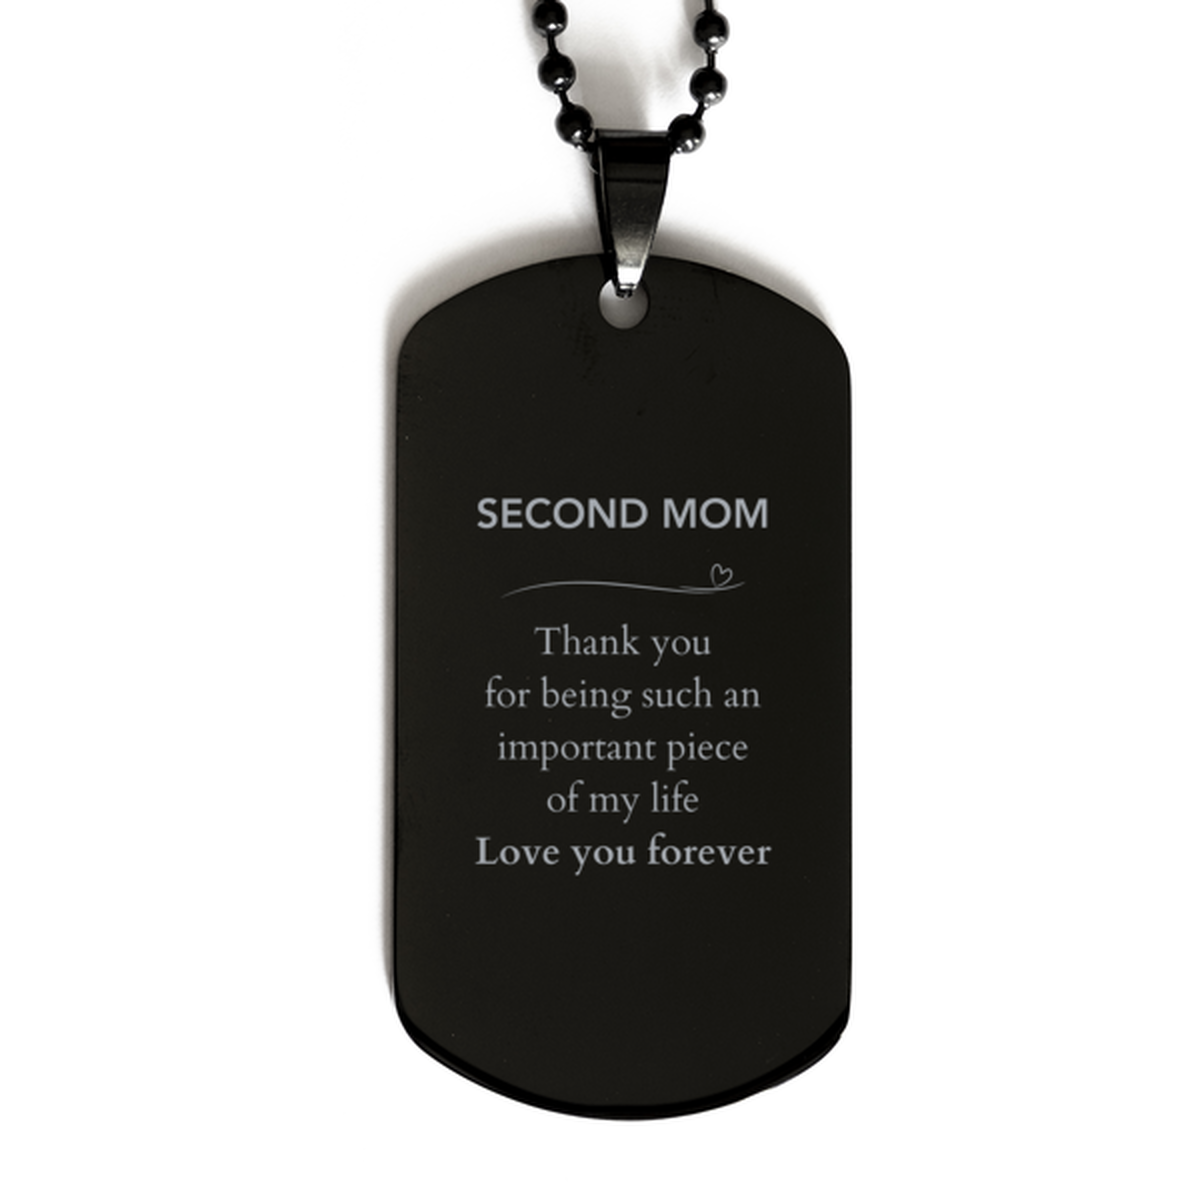 Appropriate Second Mom Black Dog Tag Epic Birthday Gifts for Second Mom Thank you for being such an important piece of my life Second Mom Christmas Mothers Fathers Day